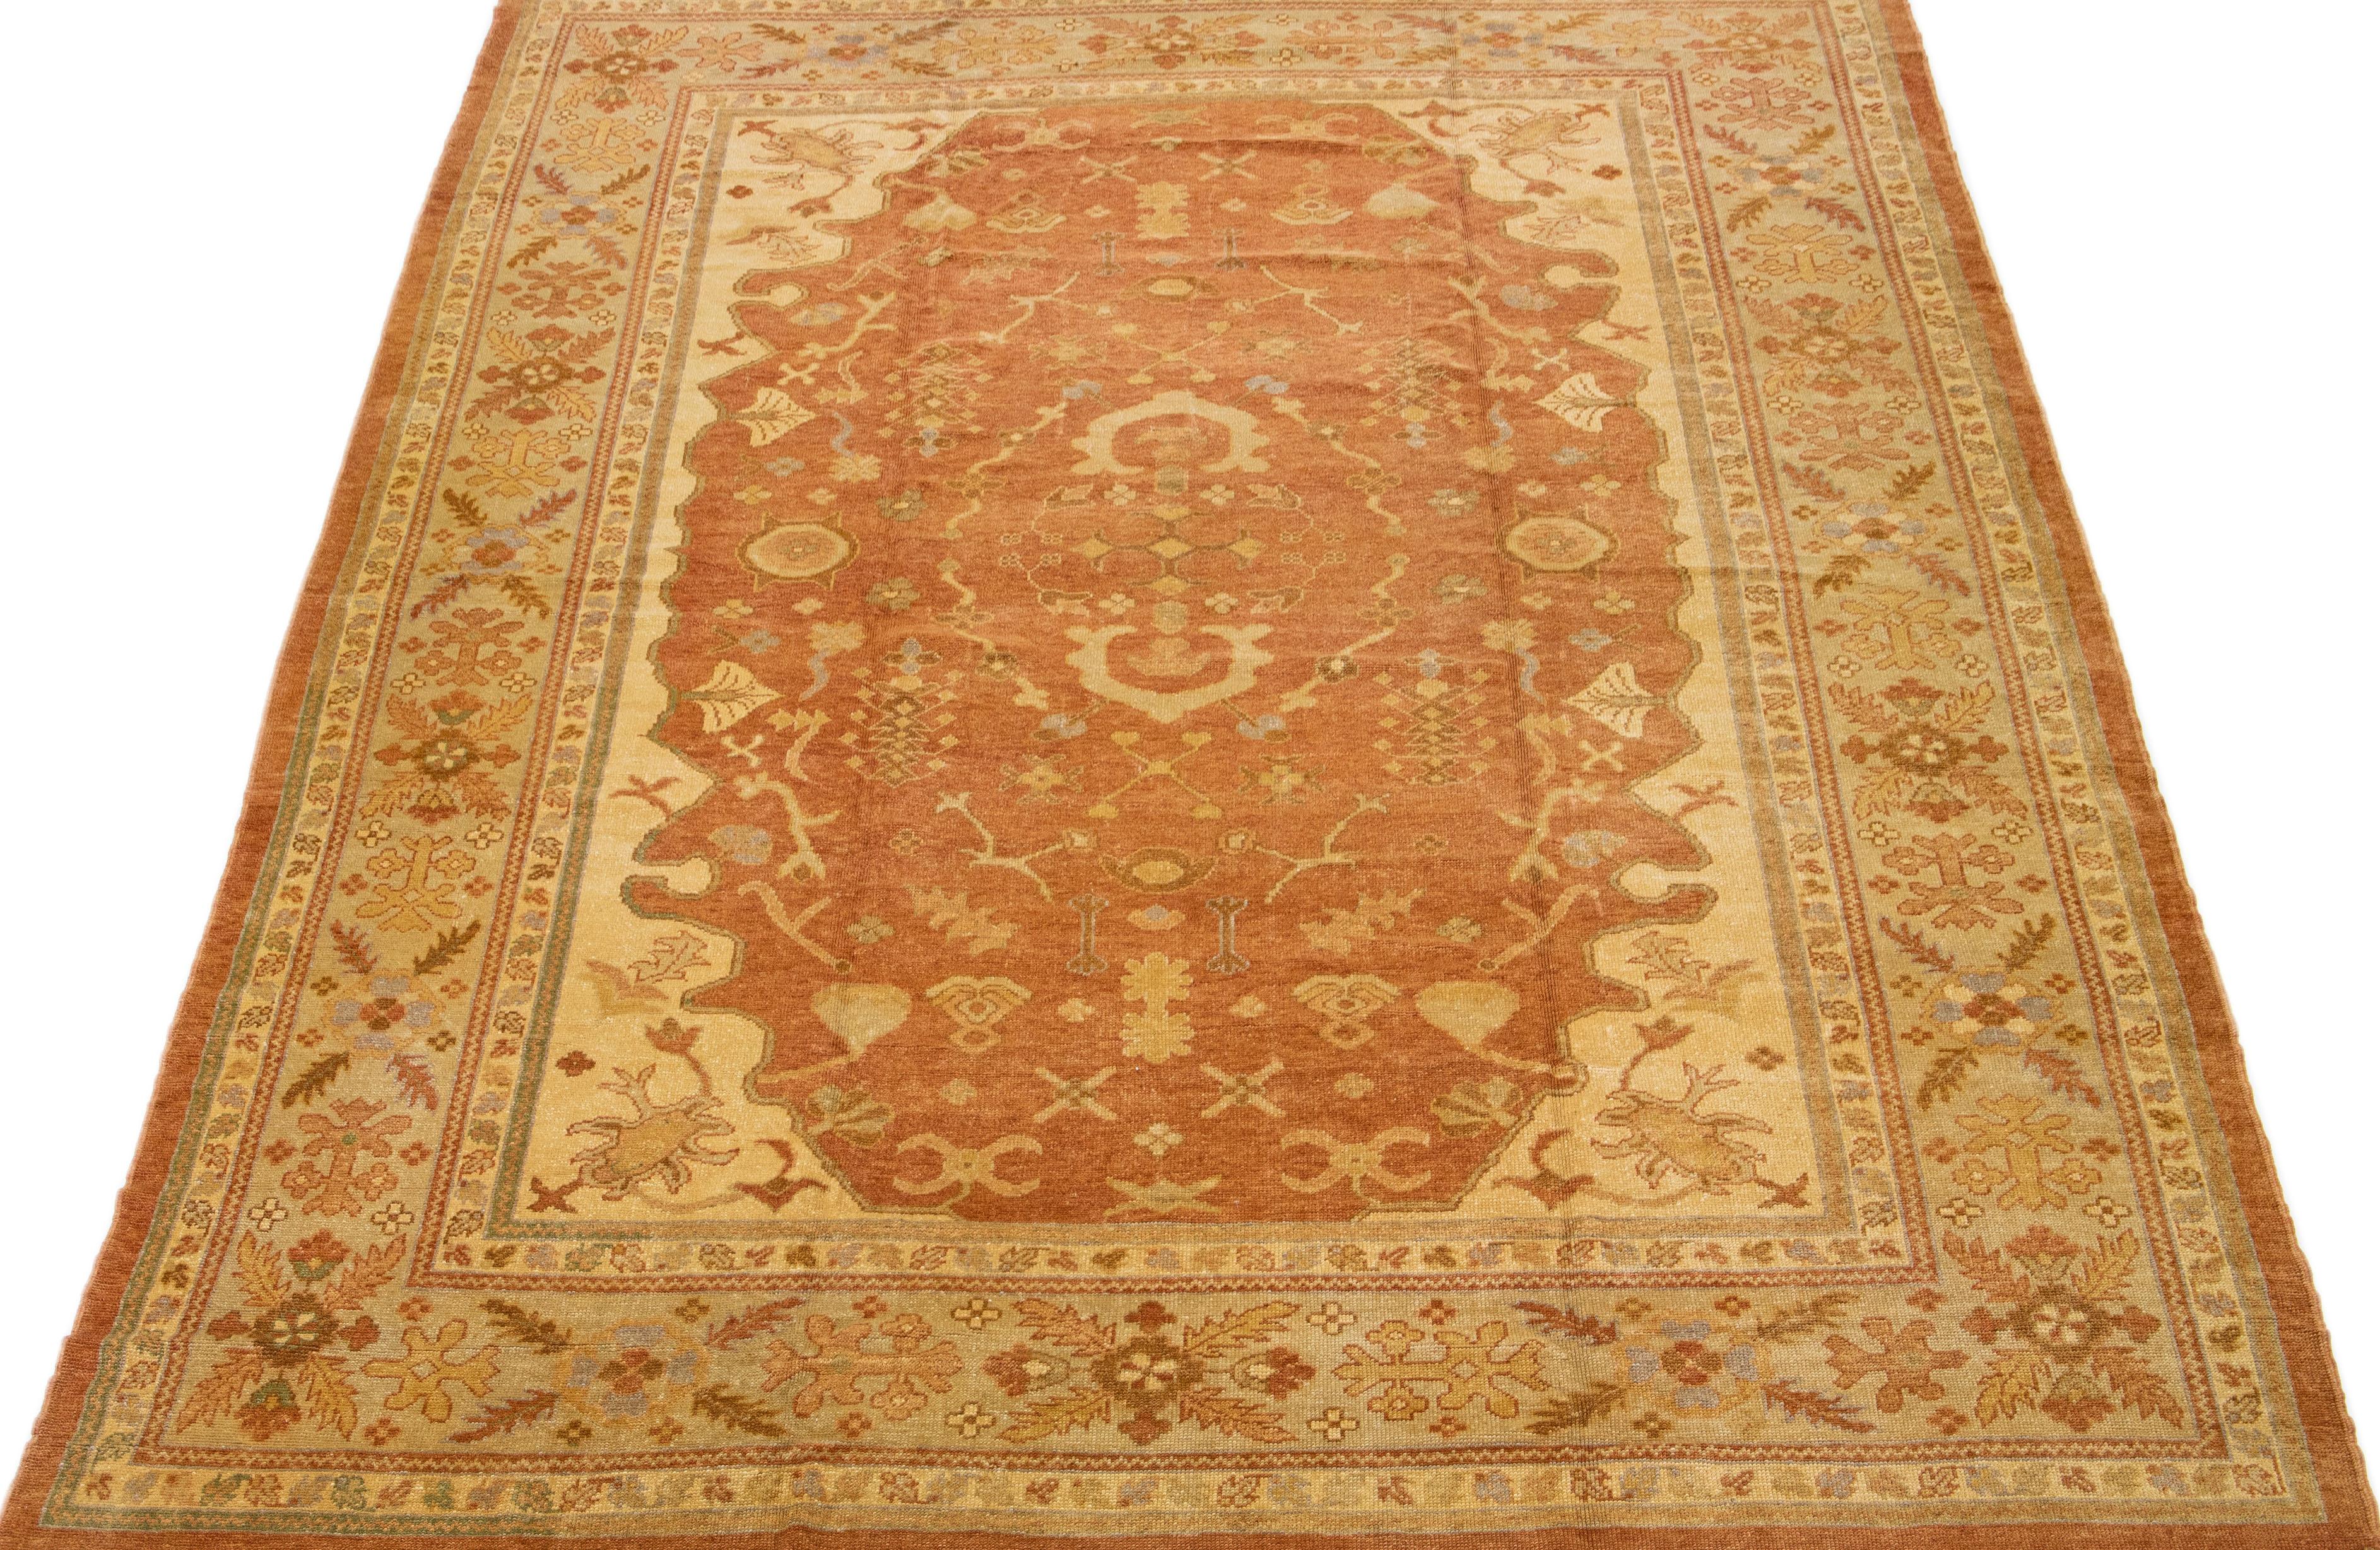 Beautiful modern Turkish hand-knotted wool rug with a copper color field. This rug has a blue-designed frame with accent colors of gray in a gorgeous all-over floral design.

This rug measures: 12'2